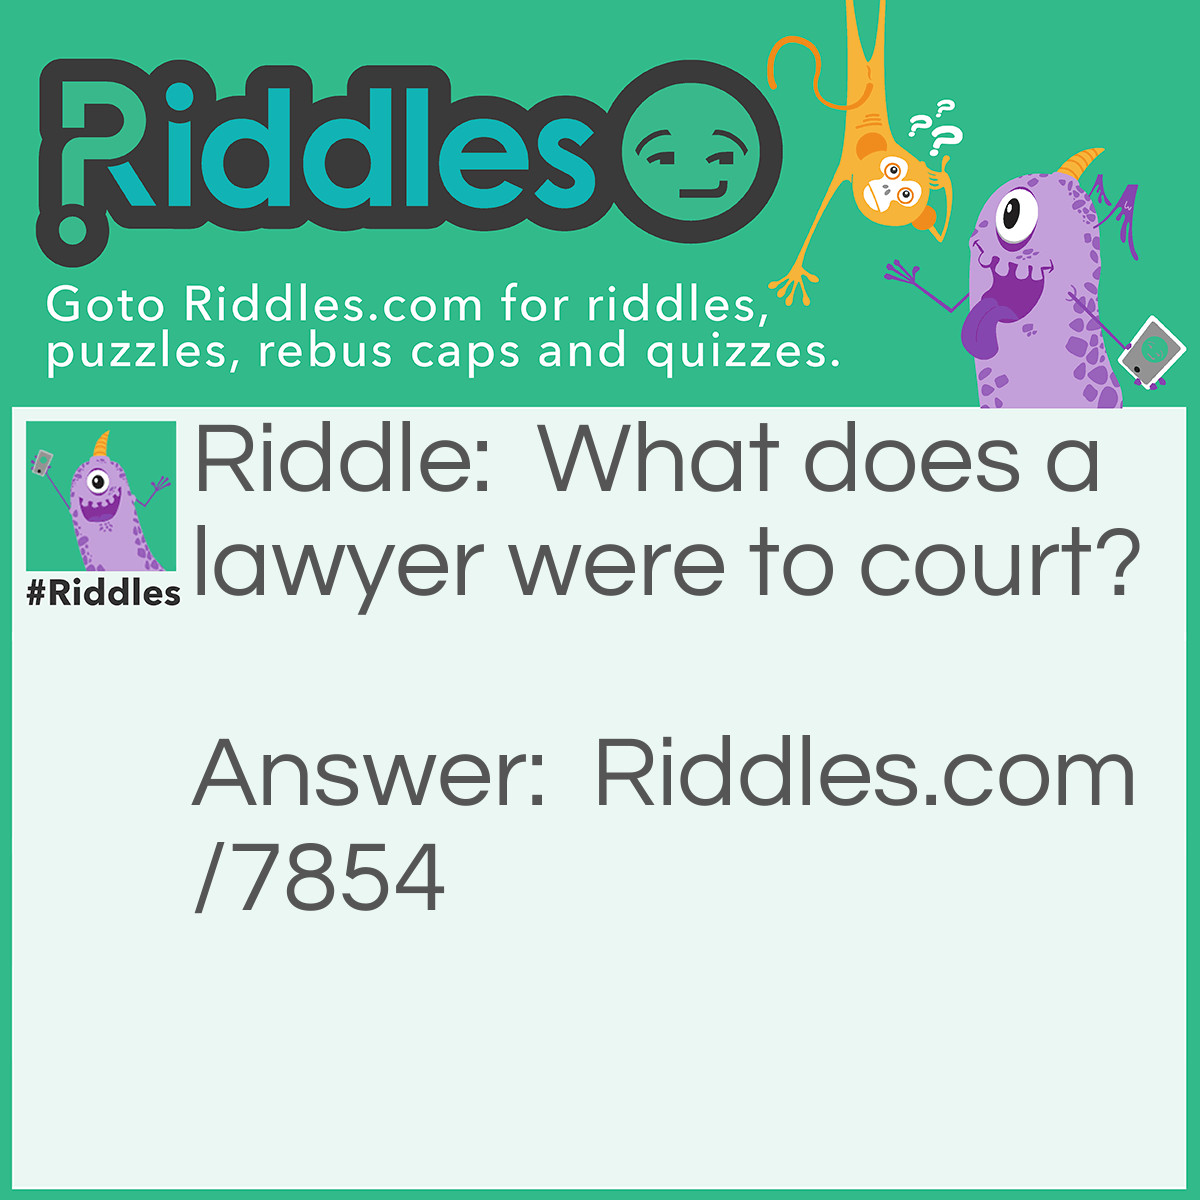 Riddle: What does a lawyer wear to court? Answer: A Lawsuit.